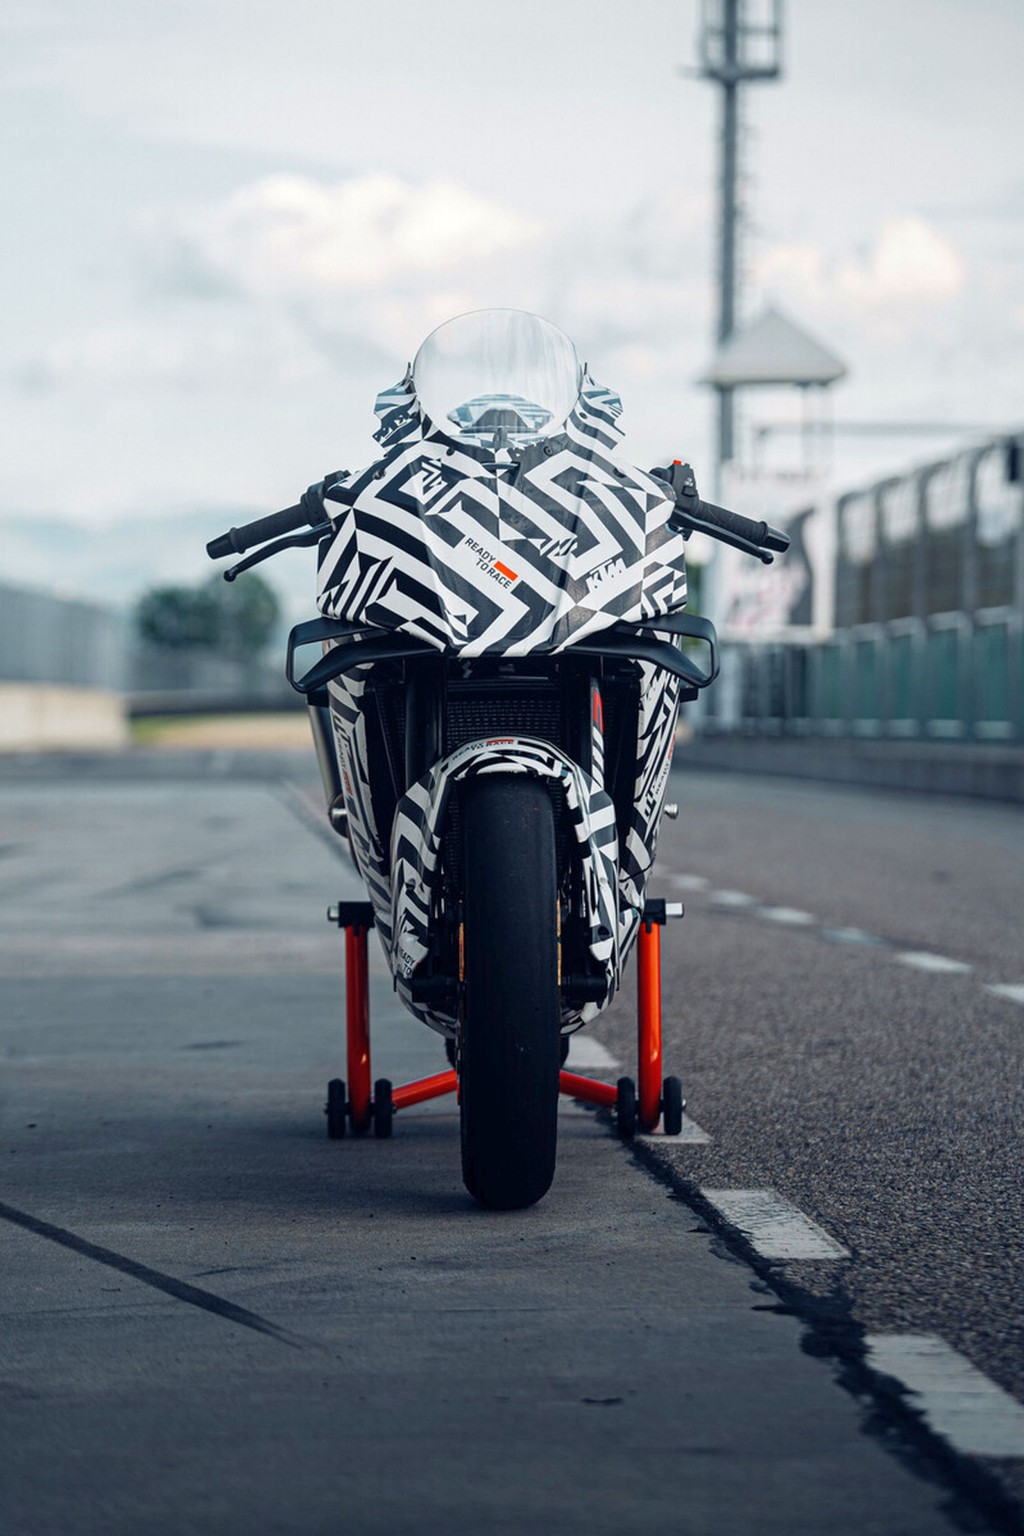 KTM 990 RC R - finally the thoroughbred sports bike for the road! - Image 43